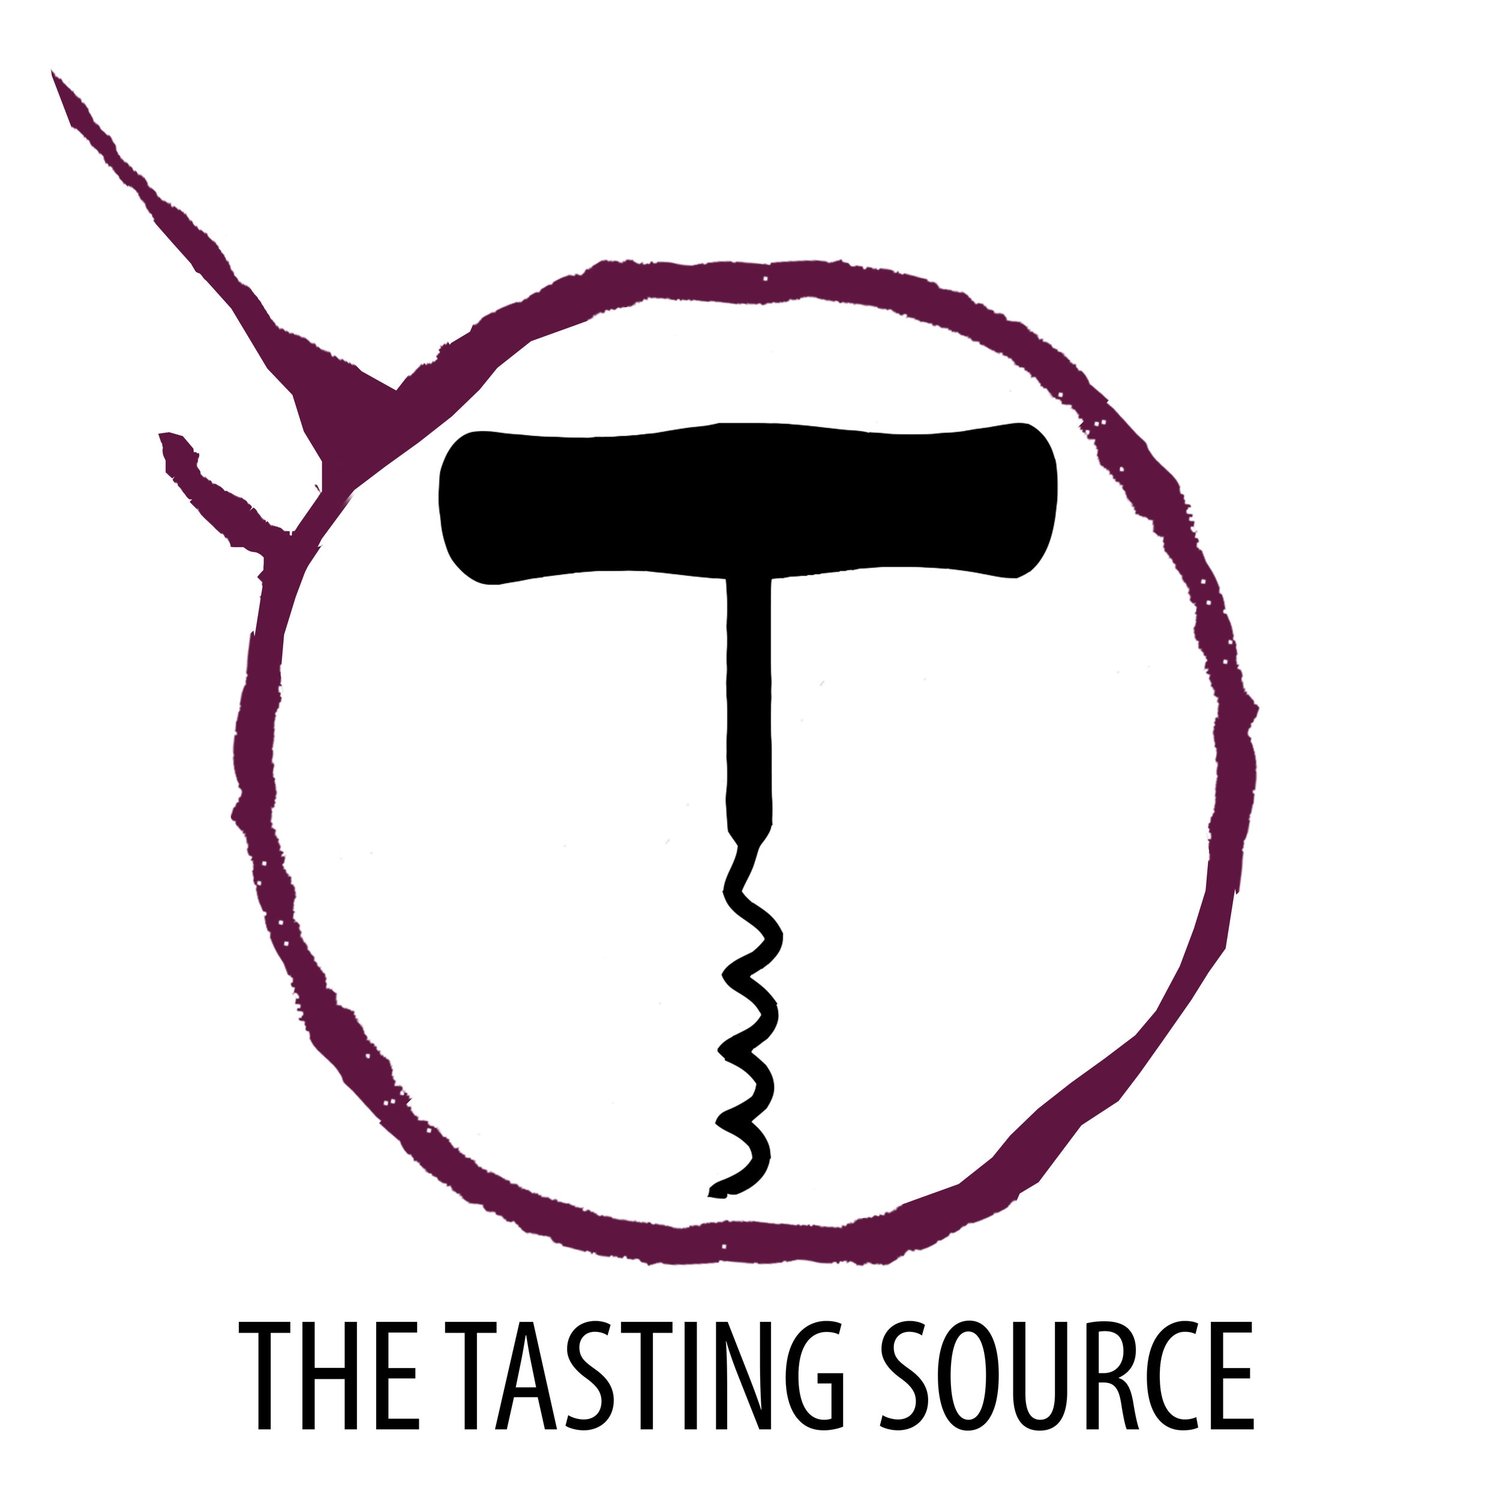 The Tasting Source